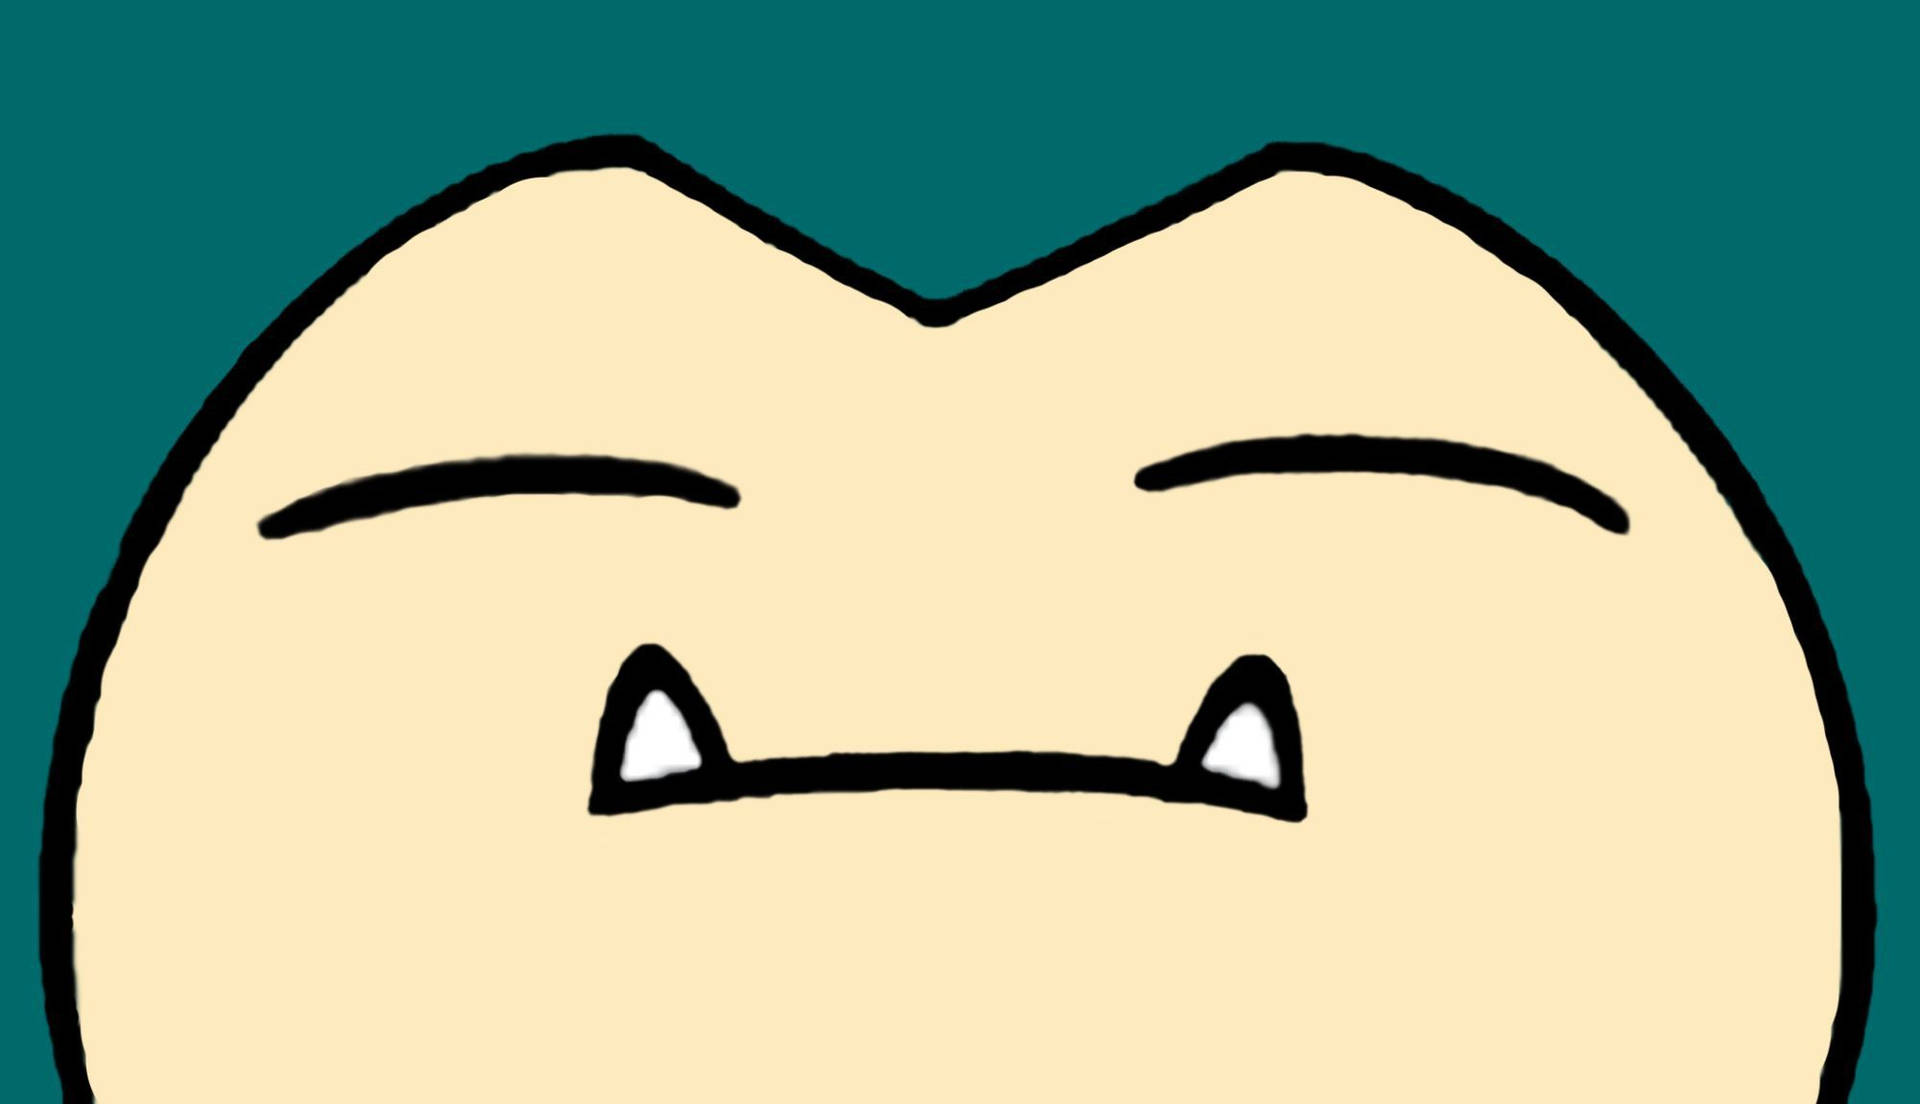 Take A Nap With Snorlax! Background